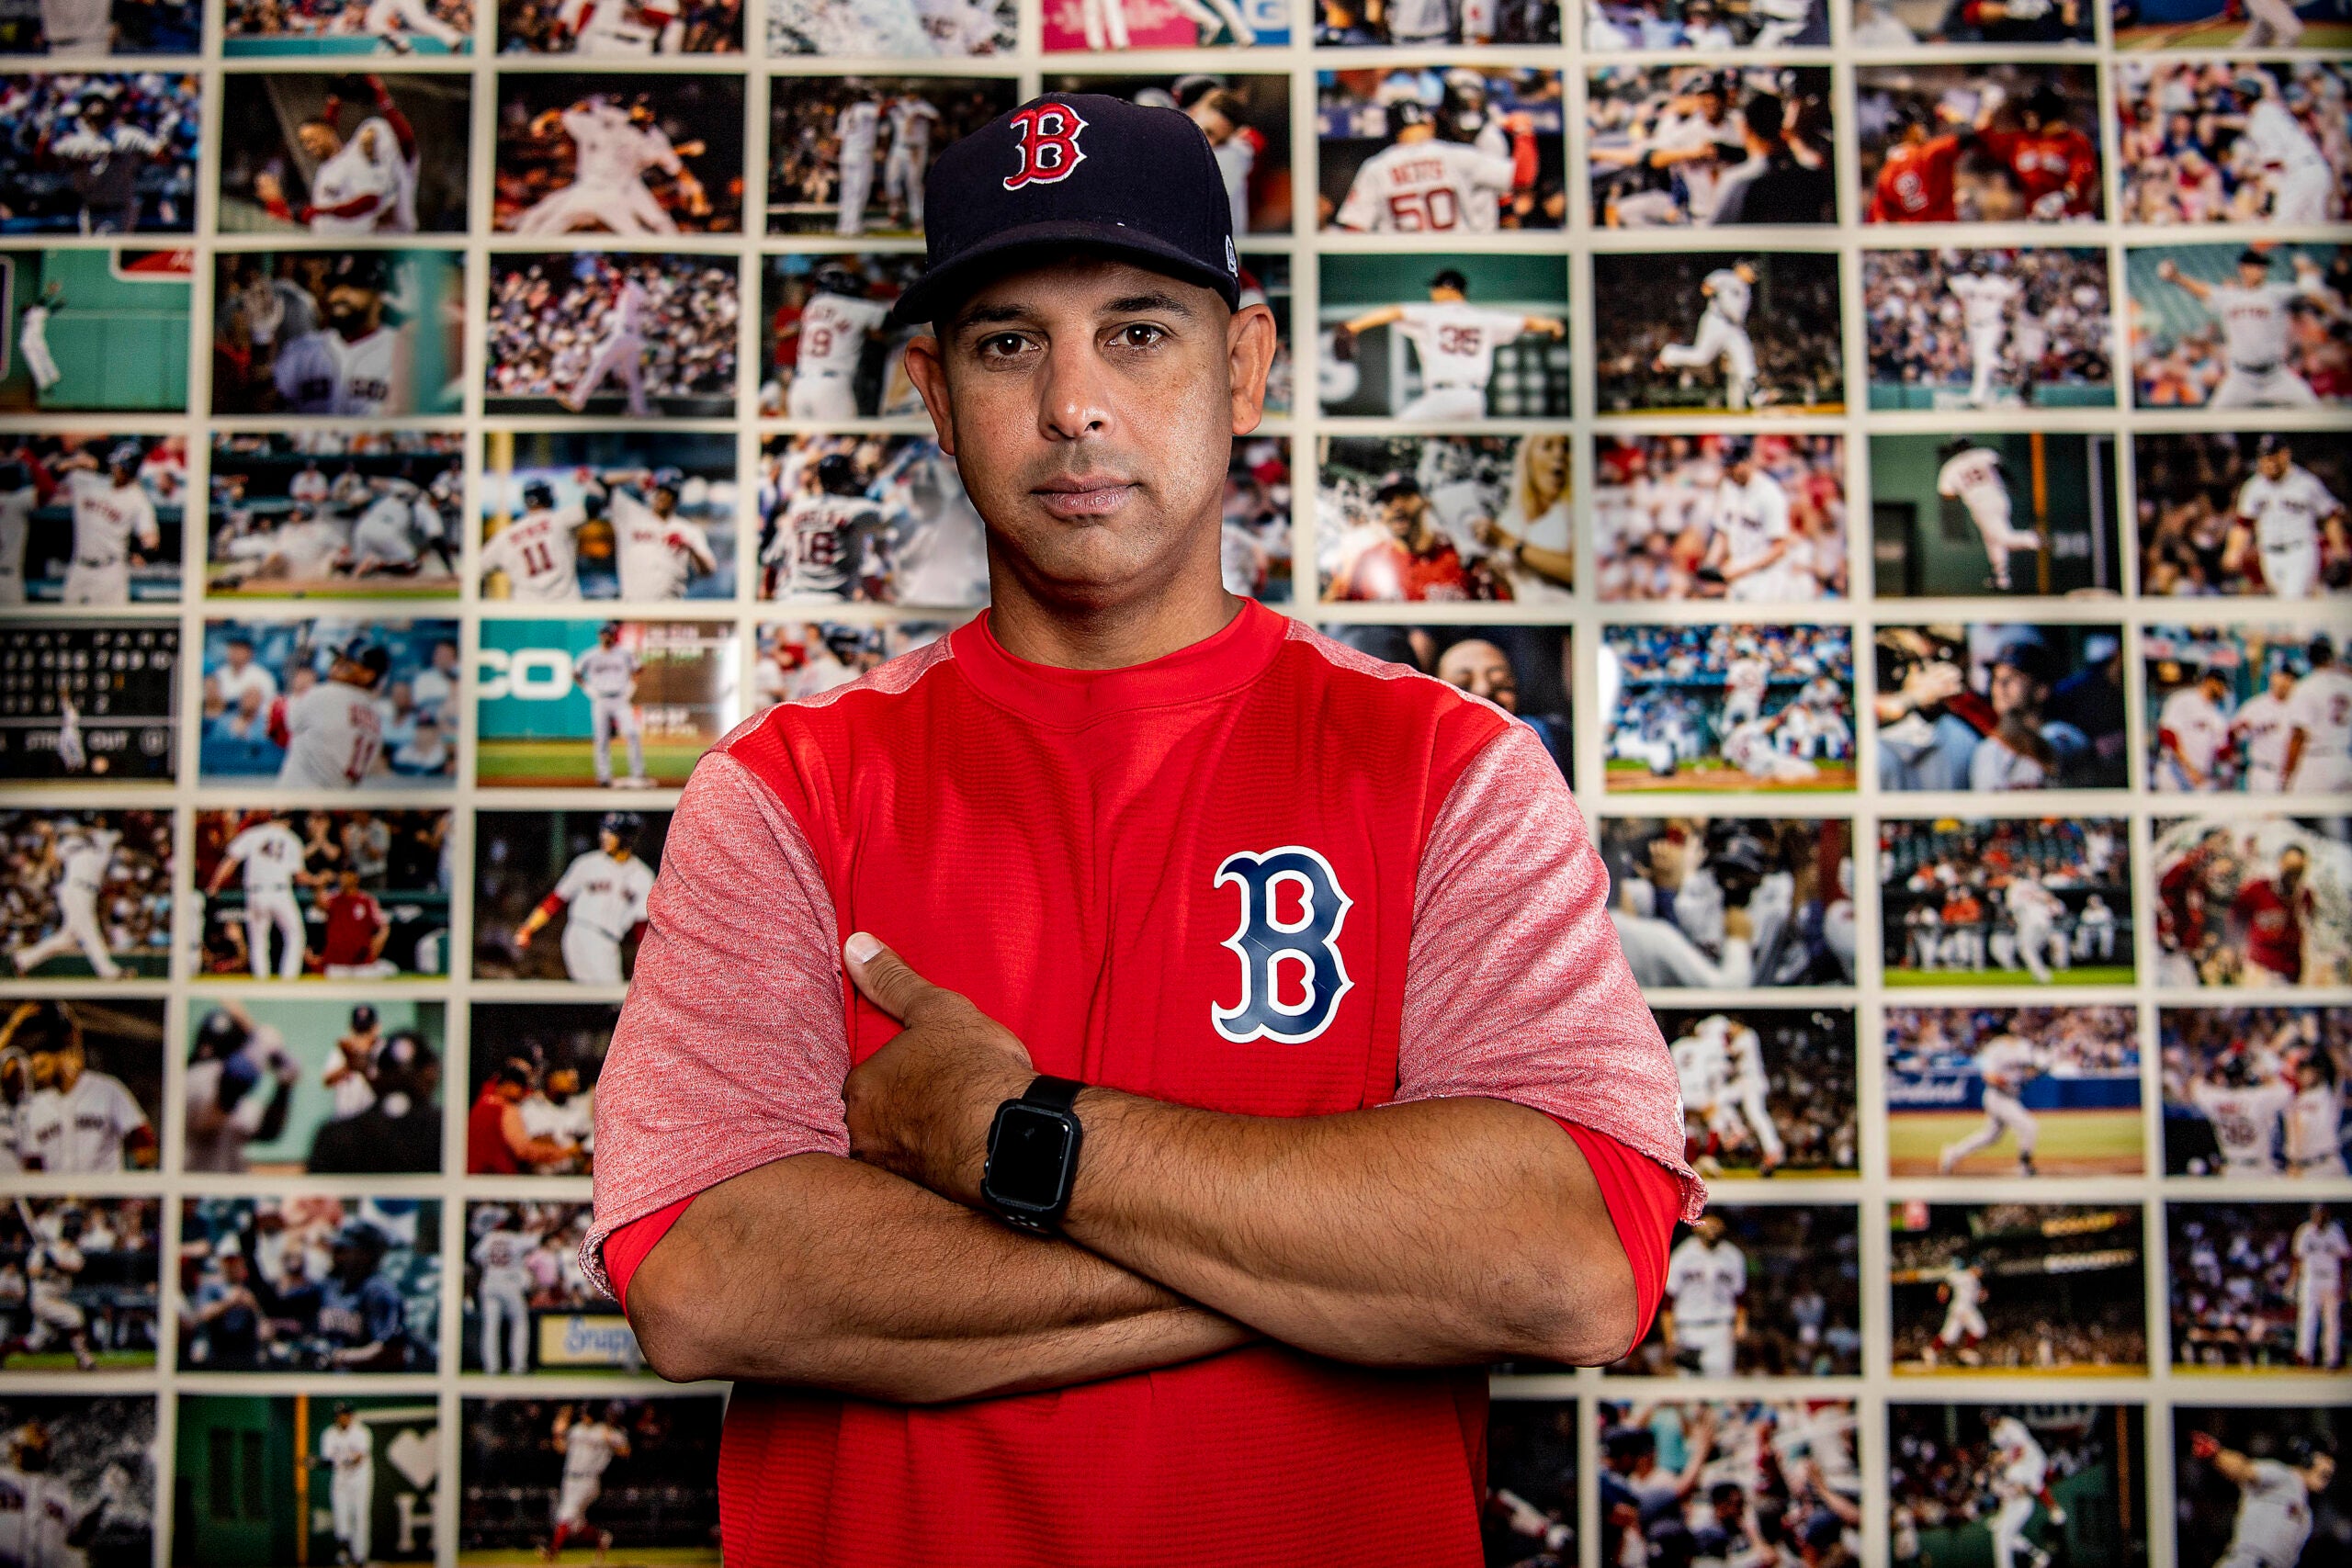 Alex Cora's 2018 Wall of Wins being auctioned for Jimmy Fund